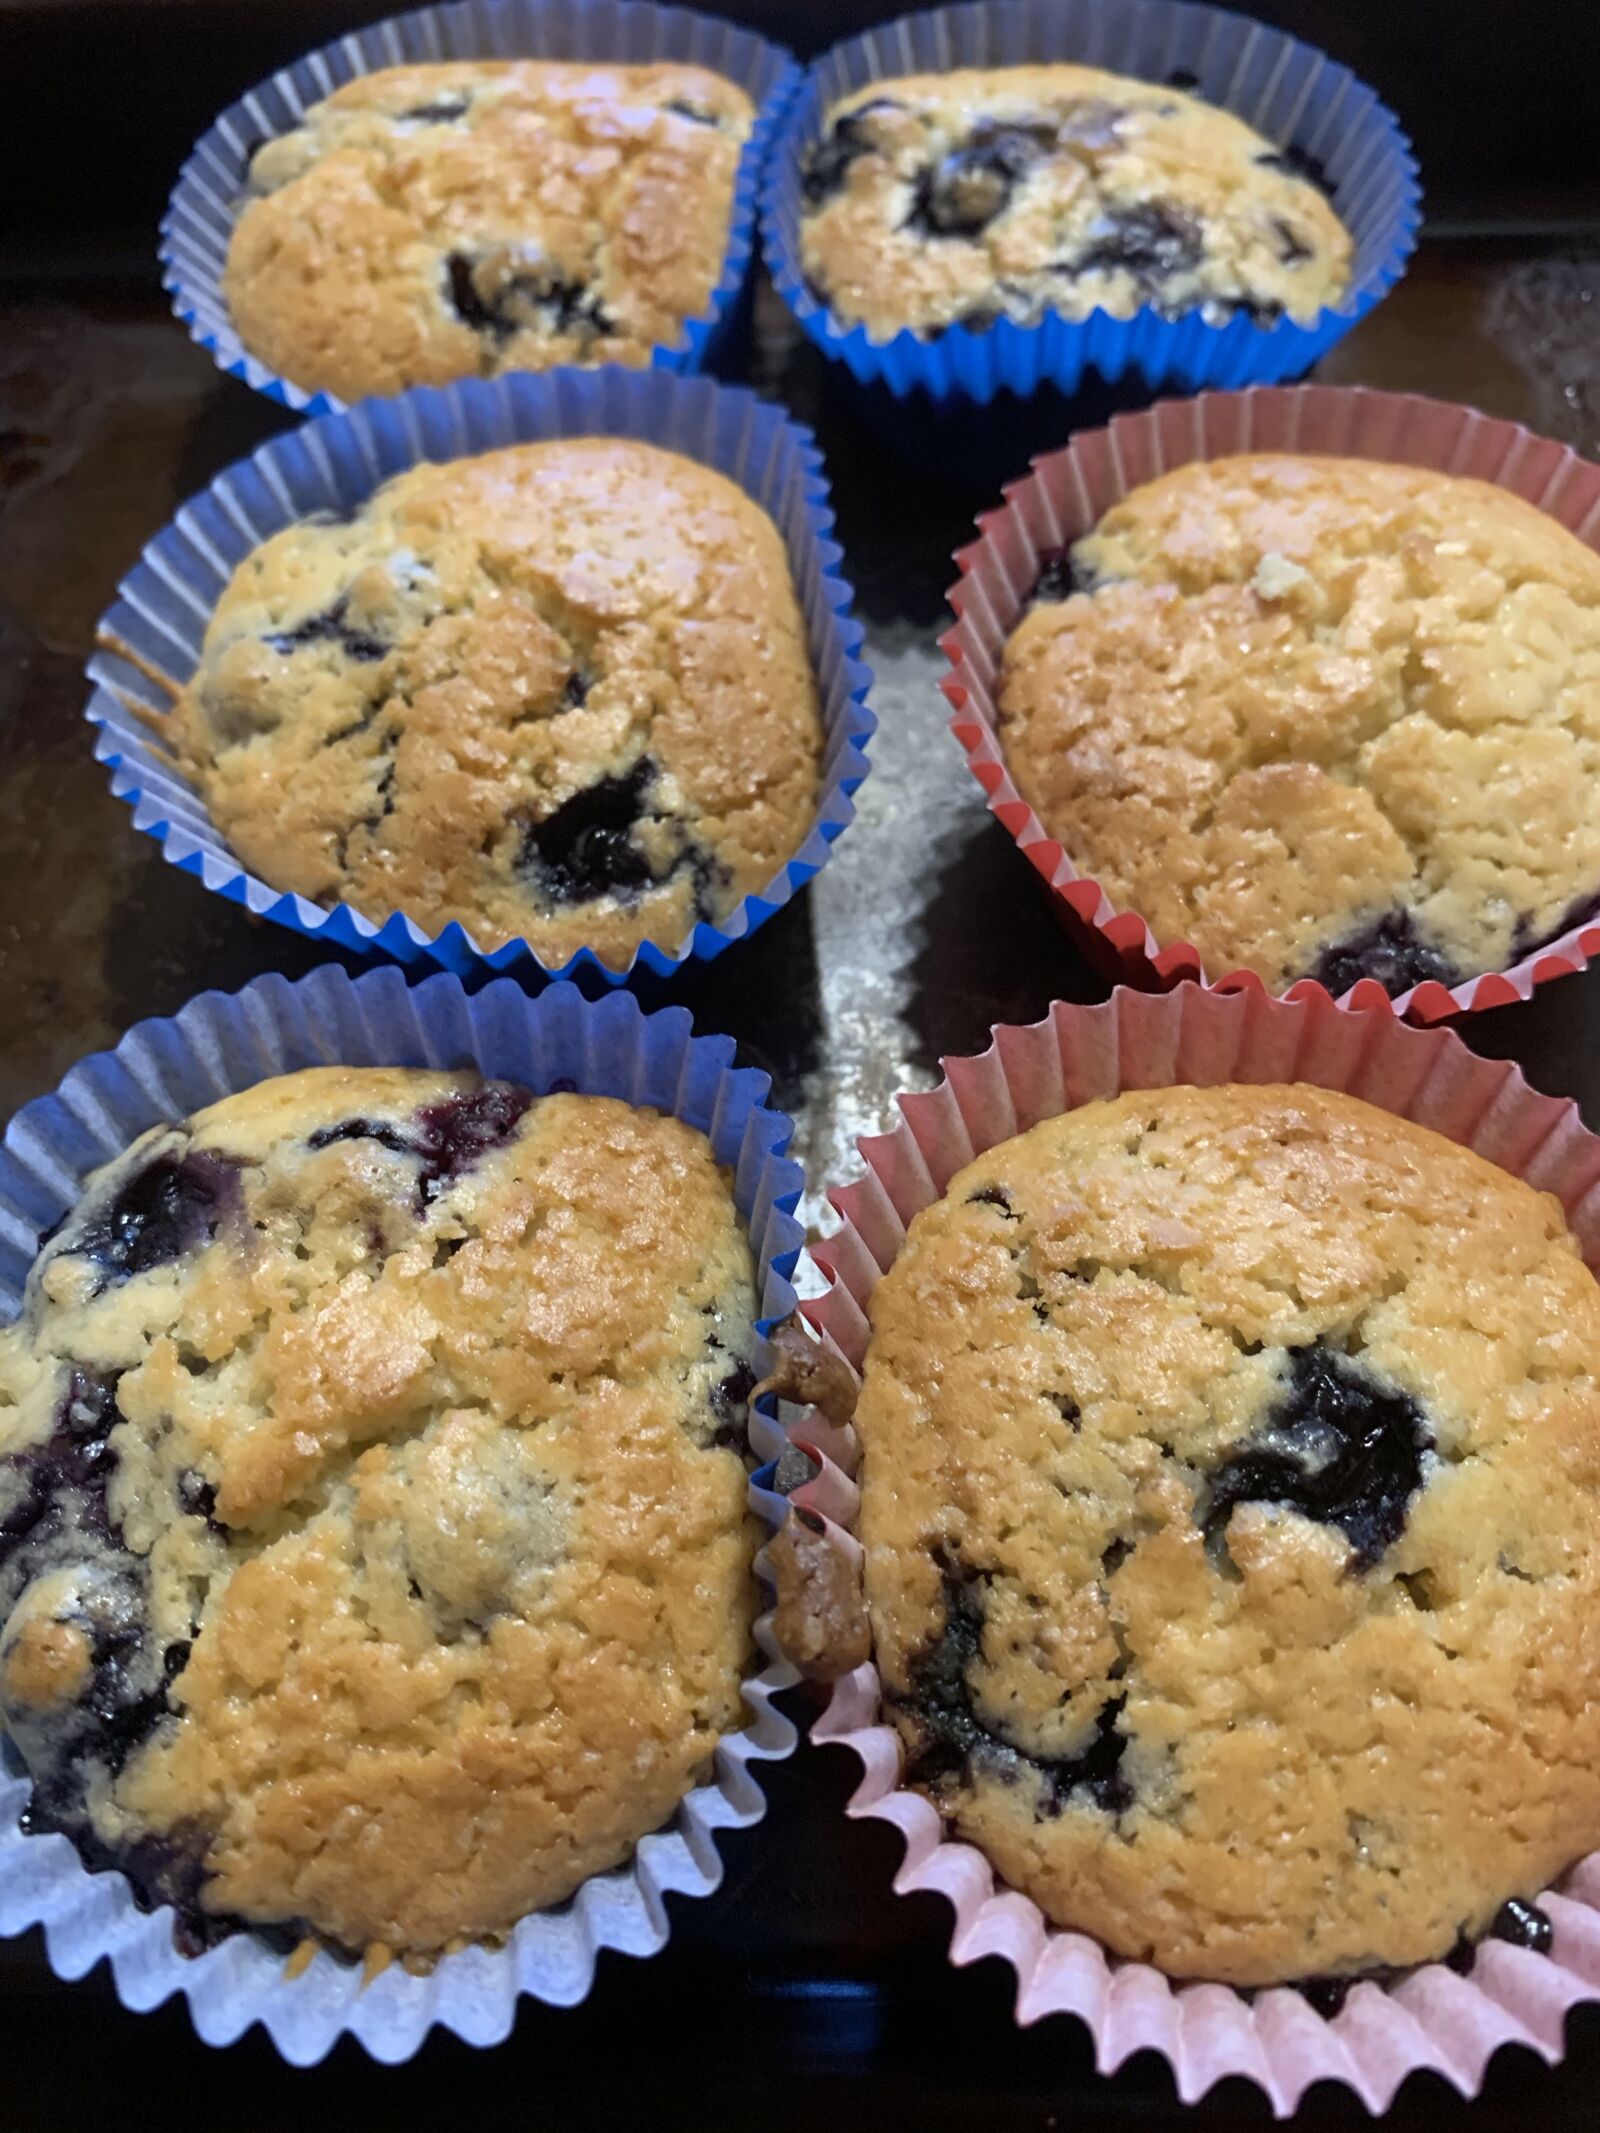 Apple iPhone XR sample photo. Blueberry muffins, lockdown, baking photography